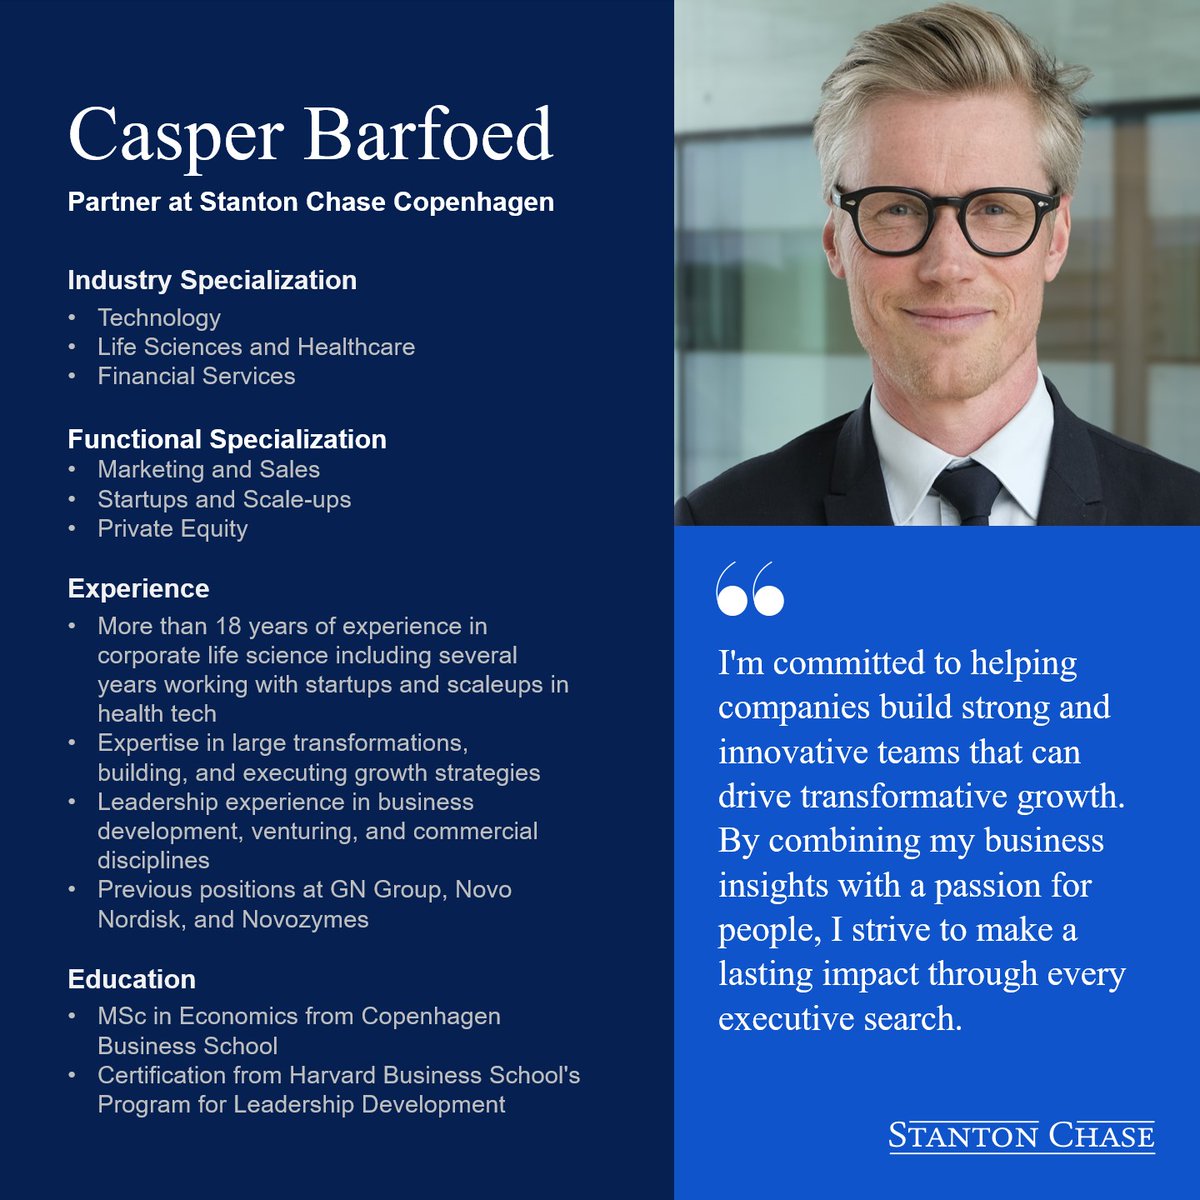 📢 Introducing Casper Barfoed, a Partner at Stanton Chase Copenhagen. 
Click here to learn more about him ➡️ ow.ly/pQxX50Rx46A

#technology #finance #lifesciences #healthcare #startups #scaleups #privateequity #executivesearch #leadershipconsulting